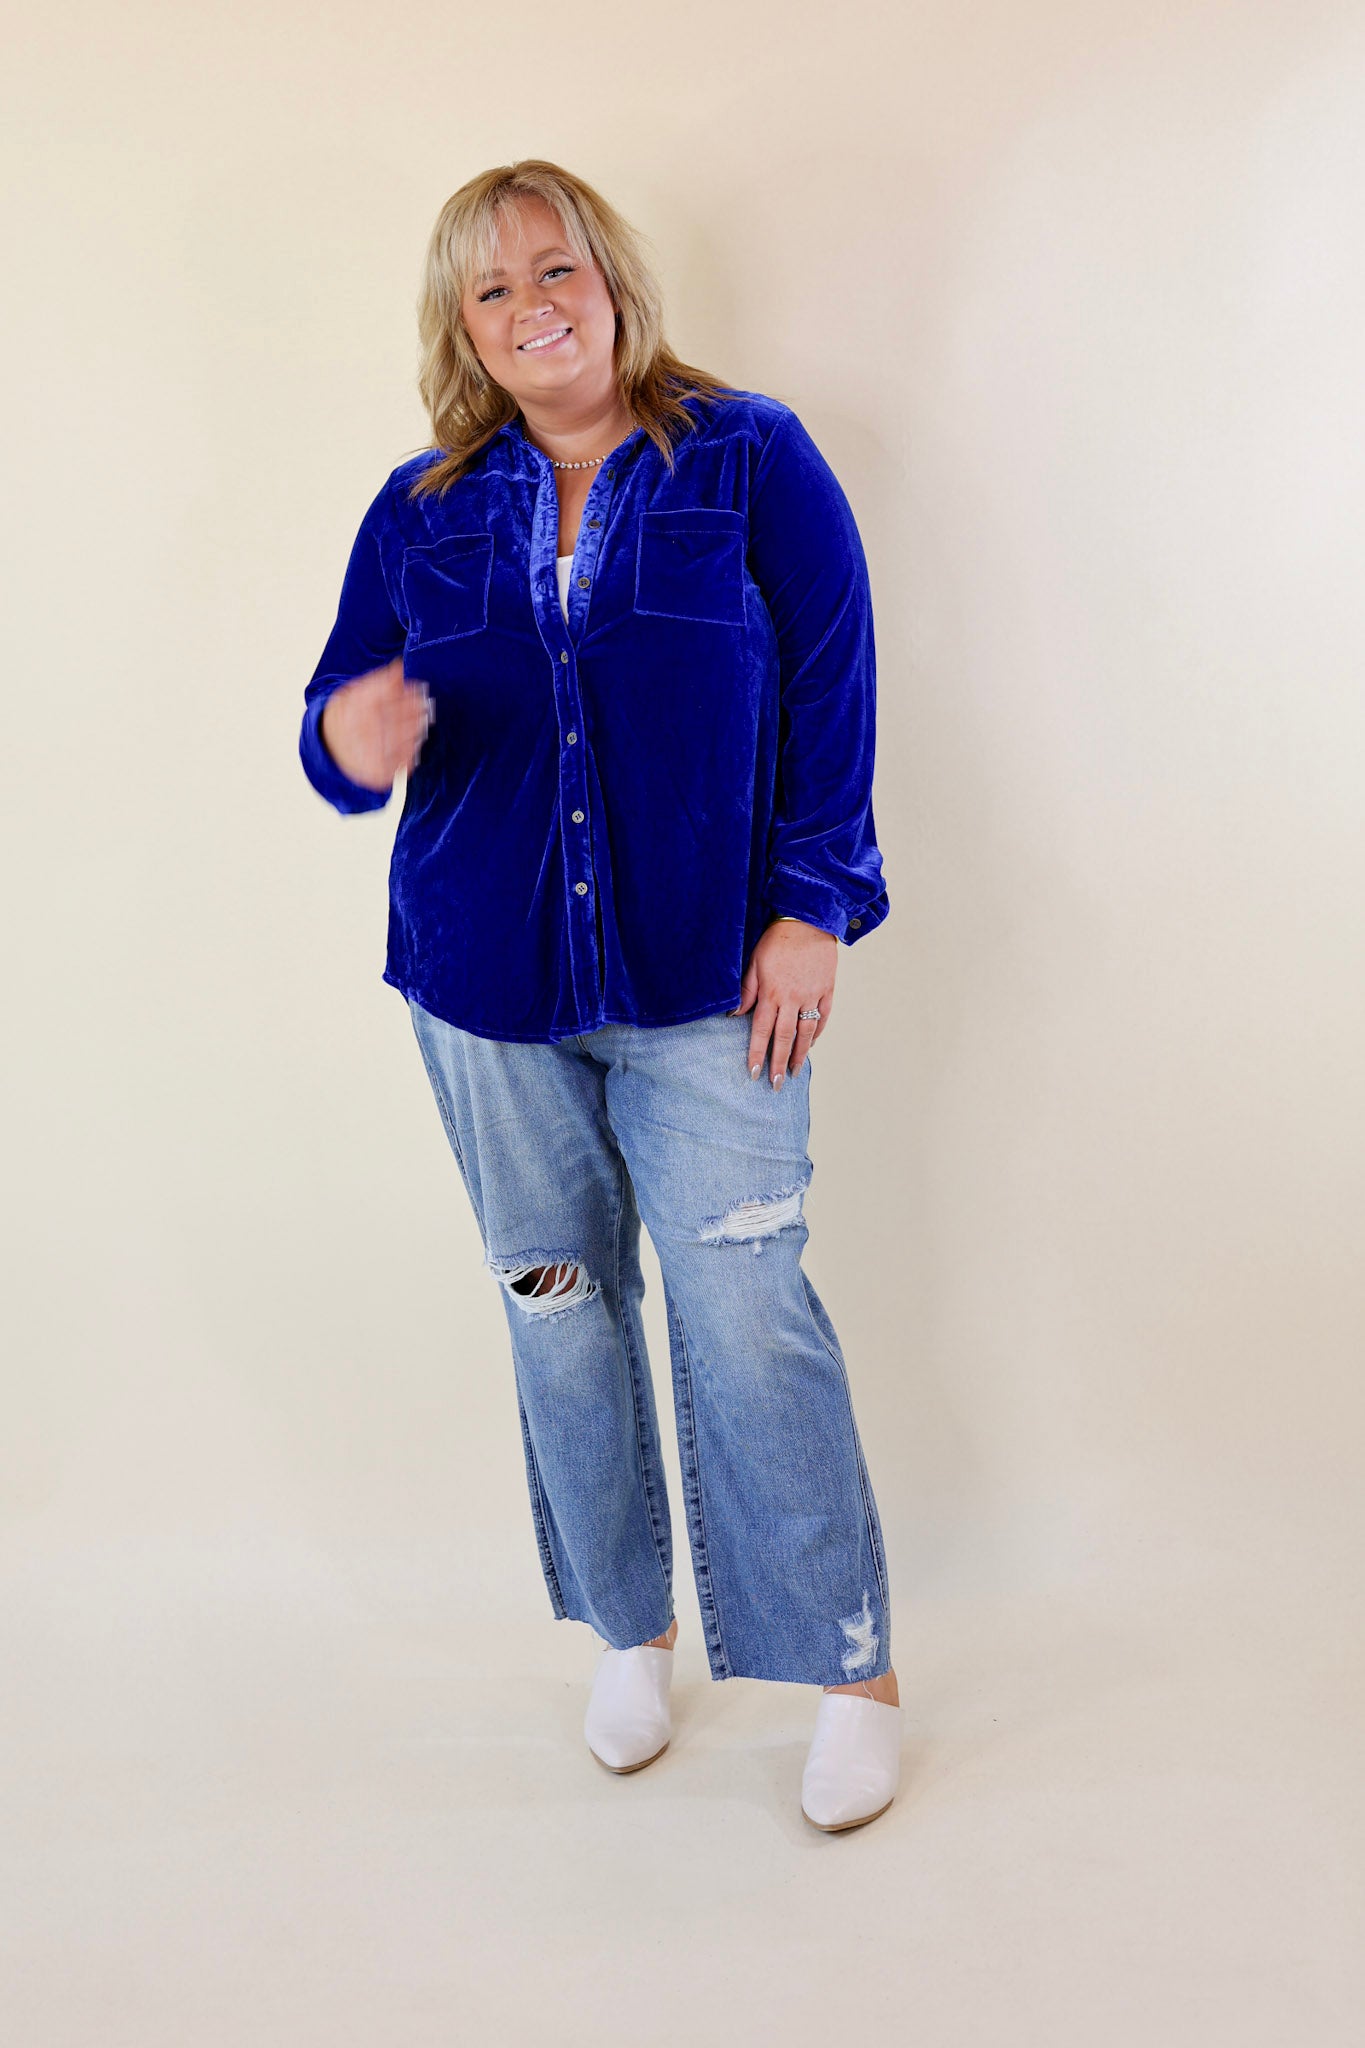 Candy Apple Evening Button Up Velvet Long Sleeve Blouse in Royal Blue - Giddy Up Glamour Boutique